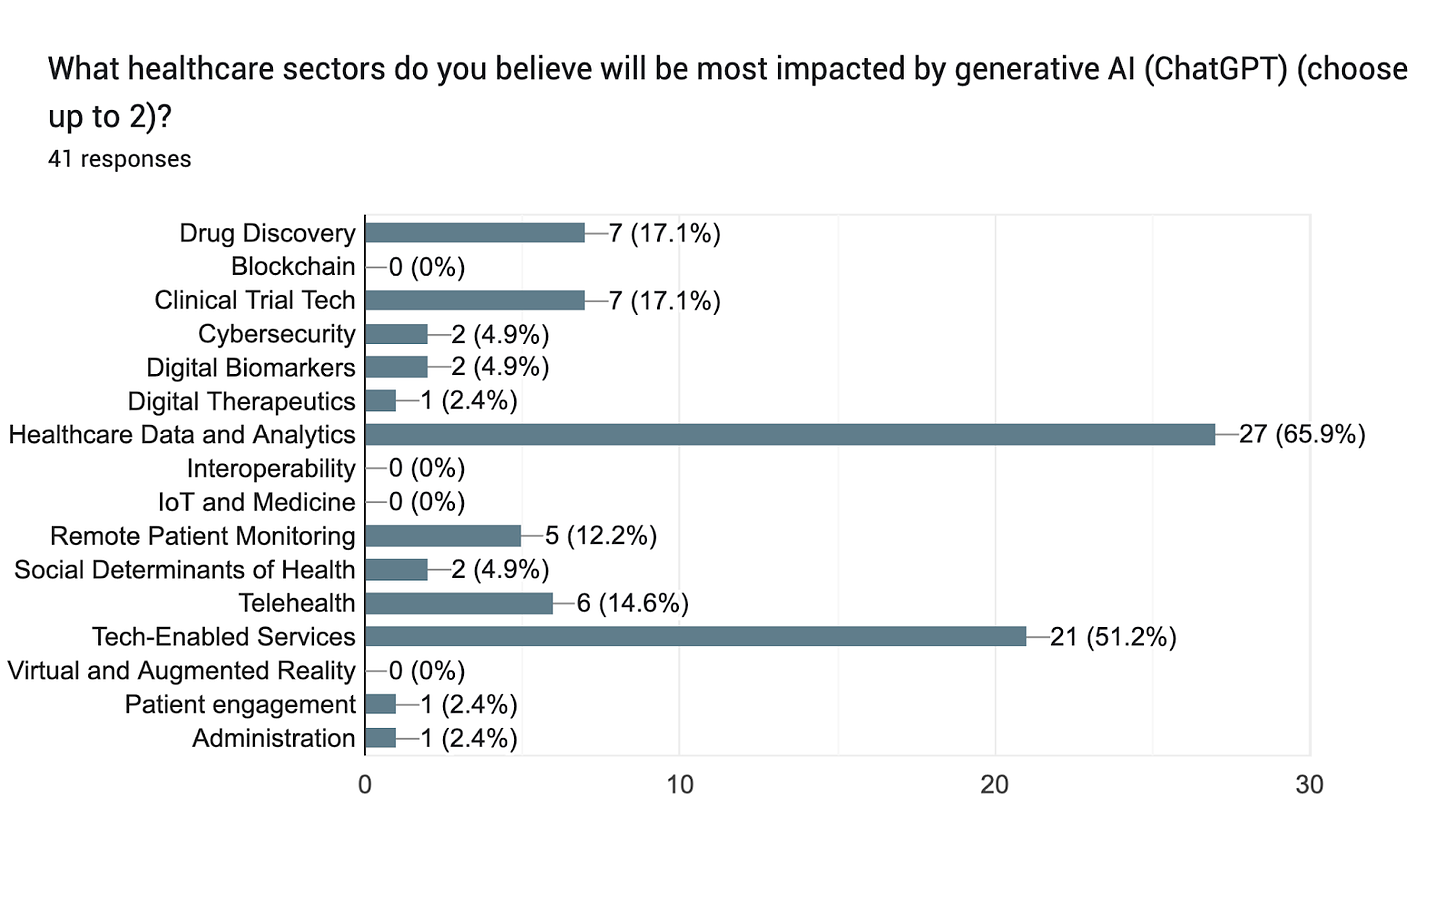 Forms response chart. Question title: What healthcare sectors do you believe will be most impacted by generative AI (ChatGPT) (choose up to 2)?
. Number of responses: 41 responses.